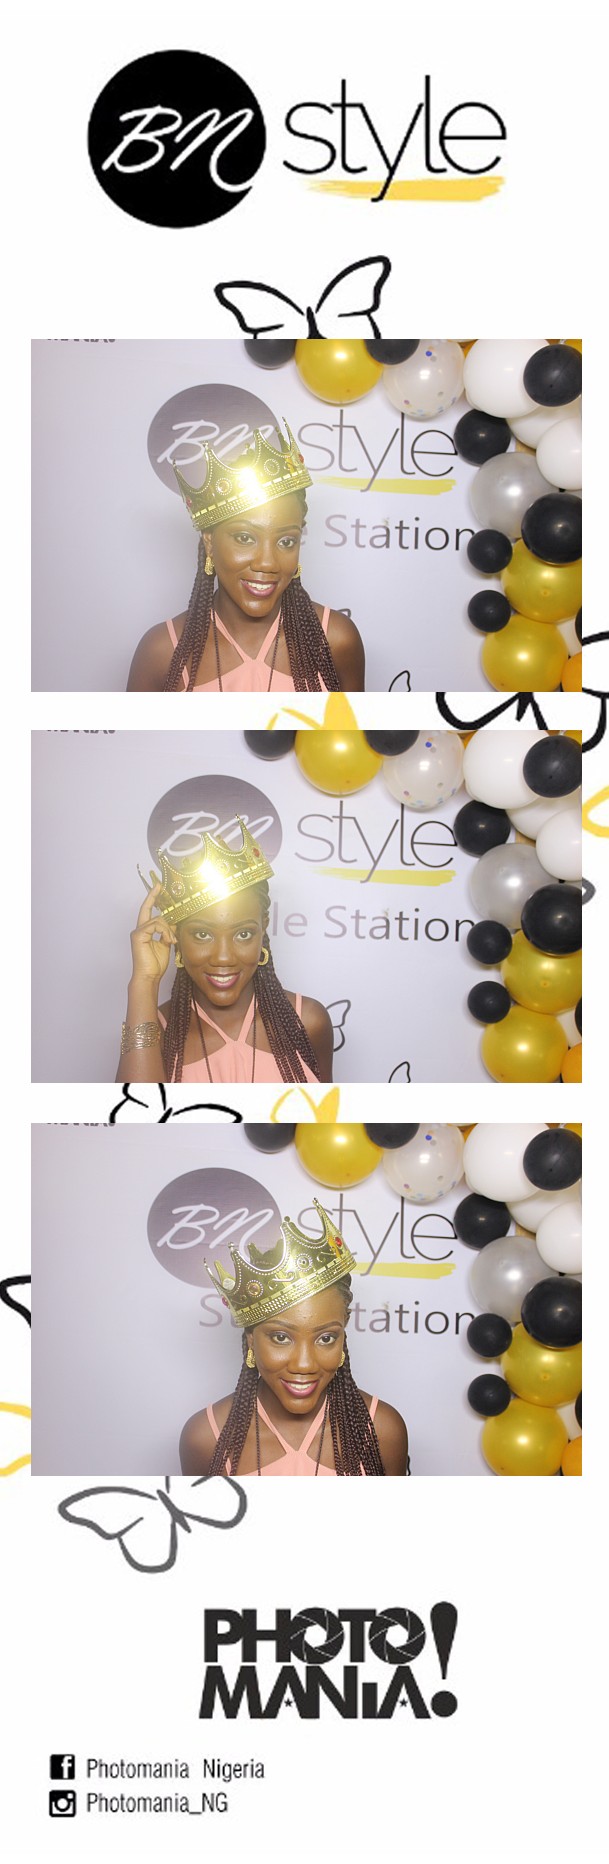 The #BNStyleStation was Where to be on Thursday at Social Media Week Lagos 2018!